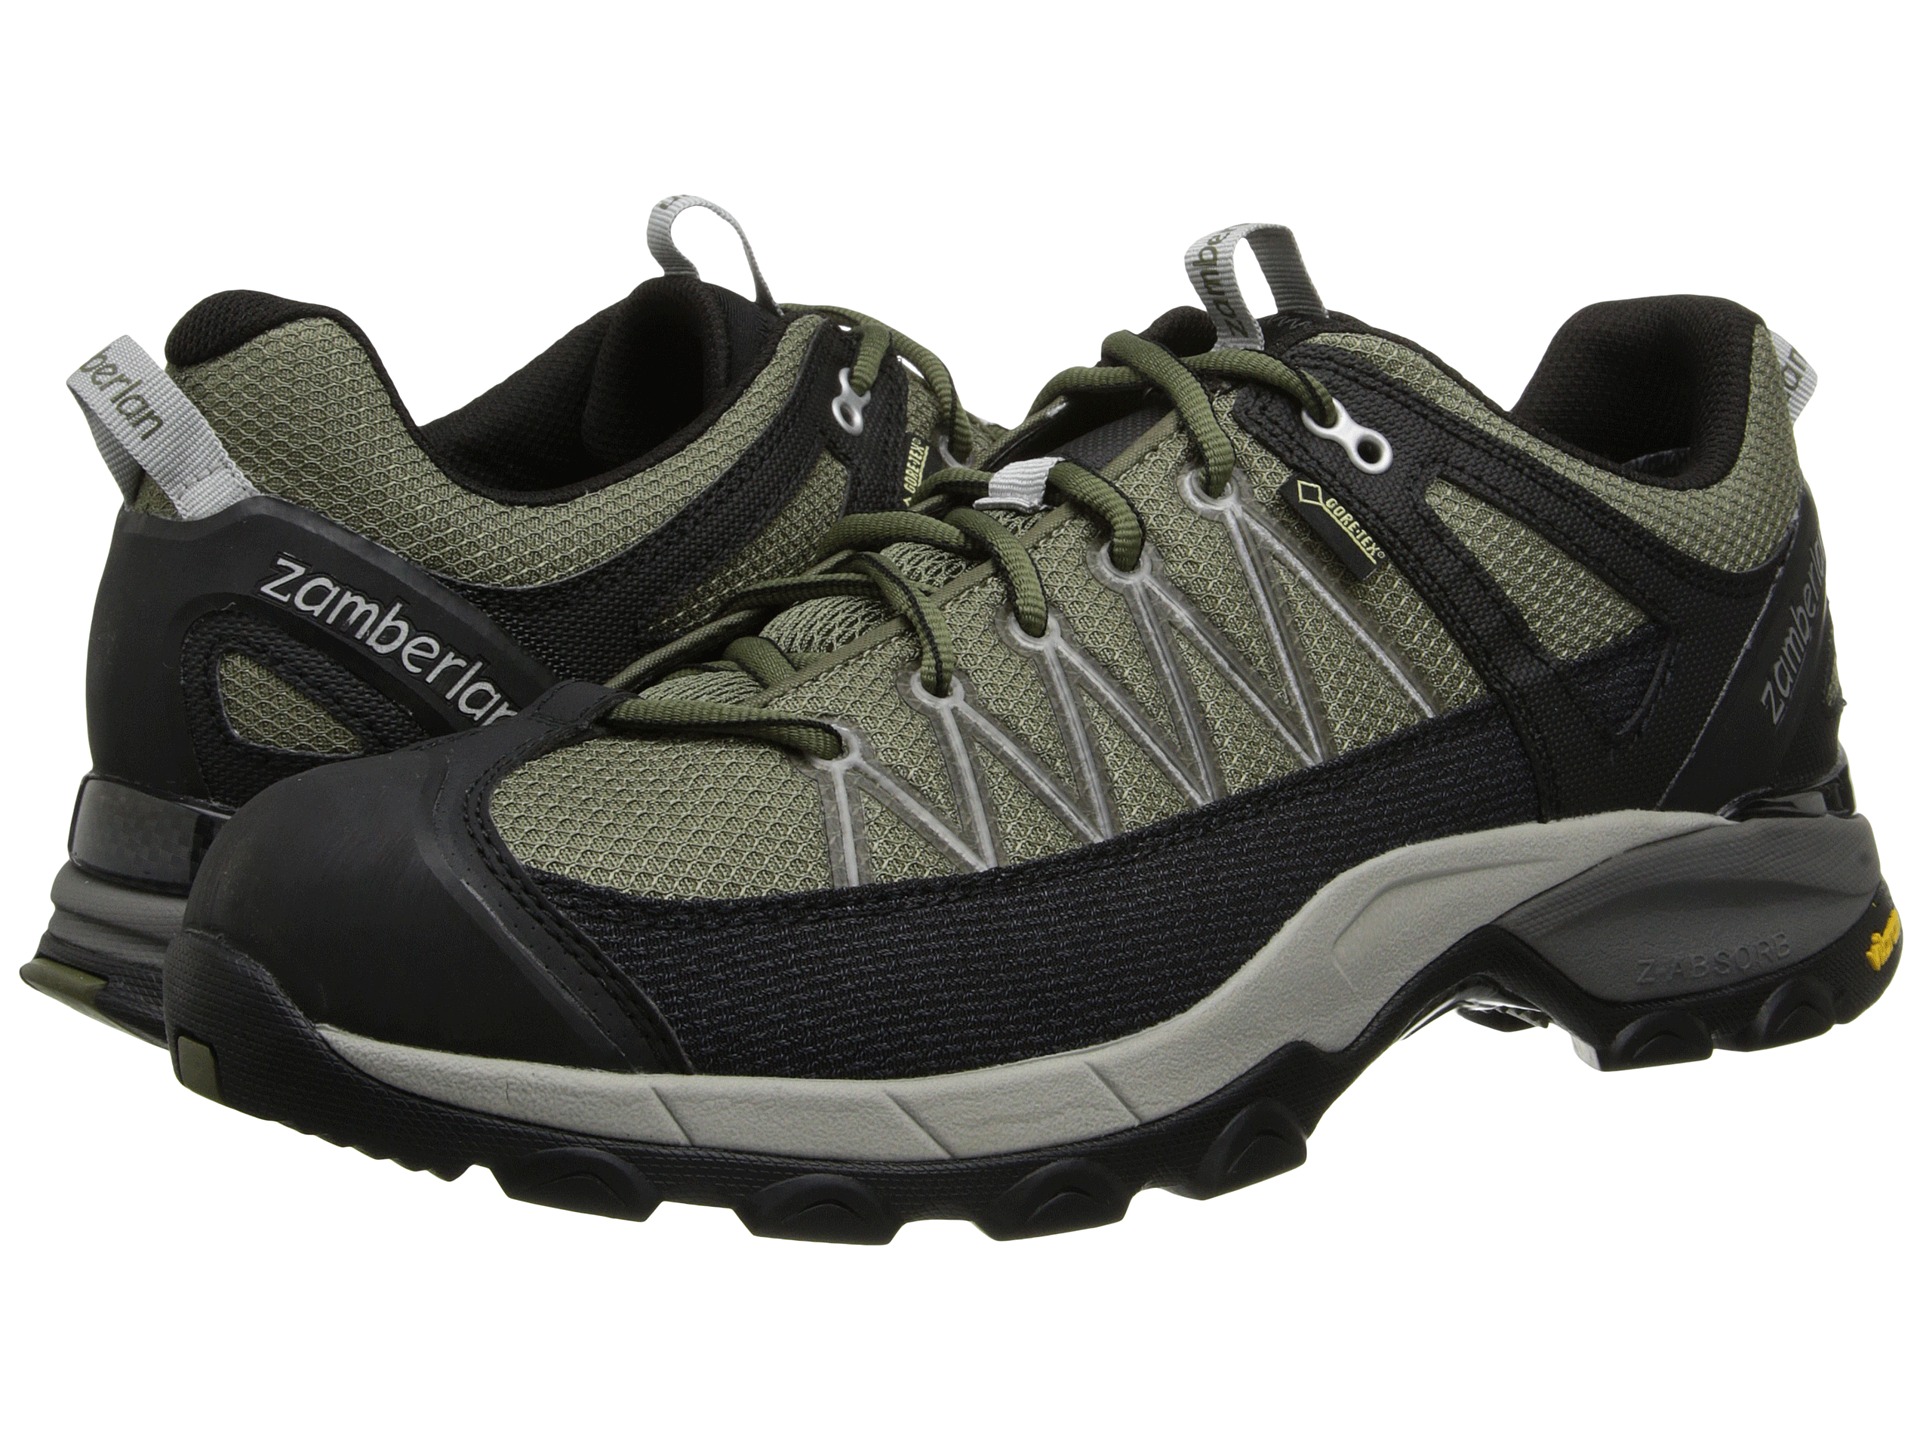 Zamberlan Crosser Gtx Rr Olive, Shoes | Shipped Free at Zappos